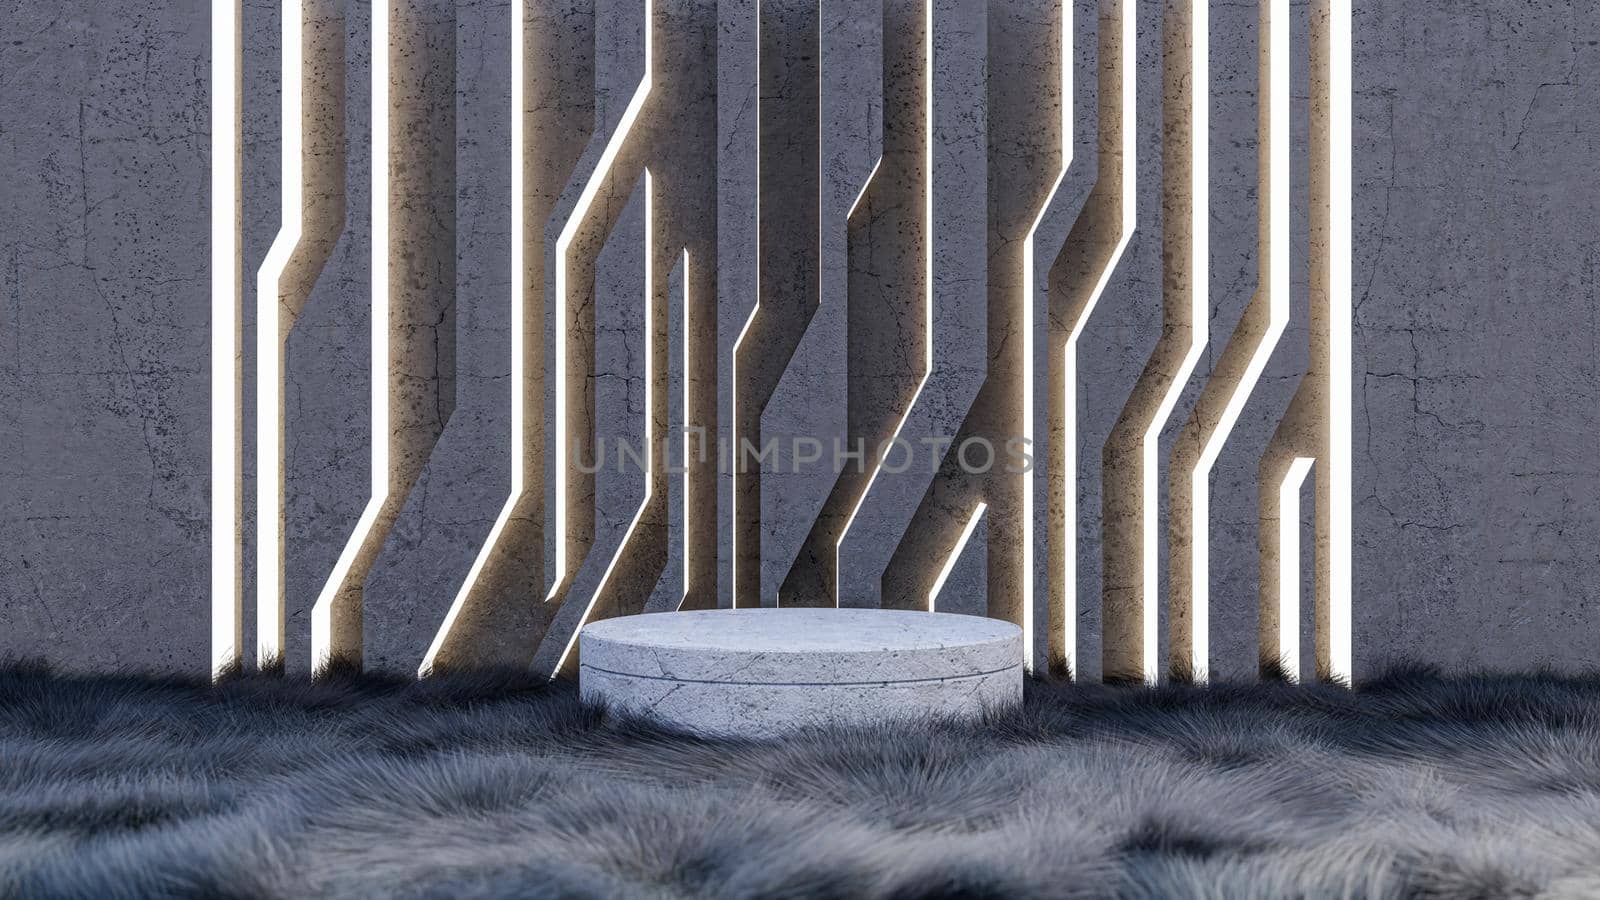 A 3d rendering image of product display on black fur floor and cracked concrete wall